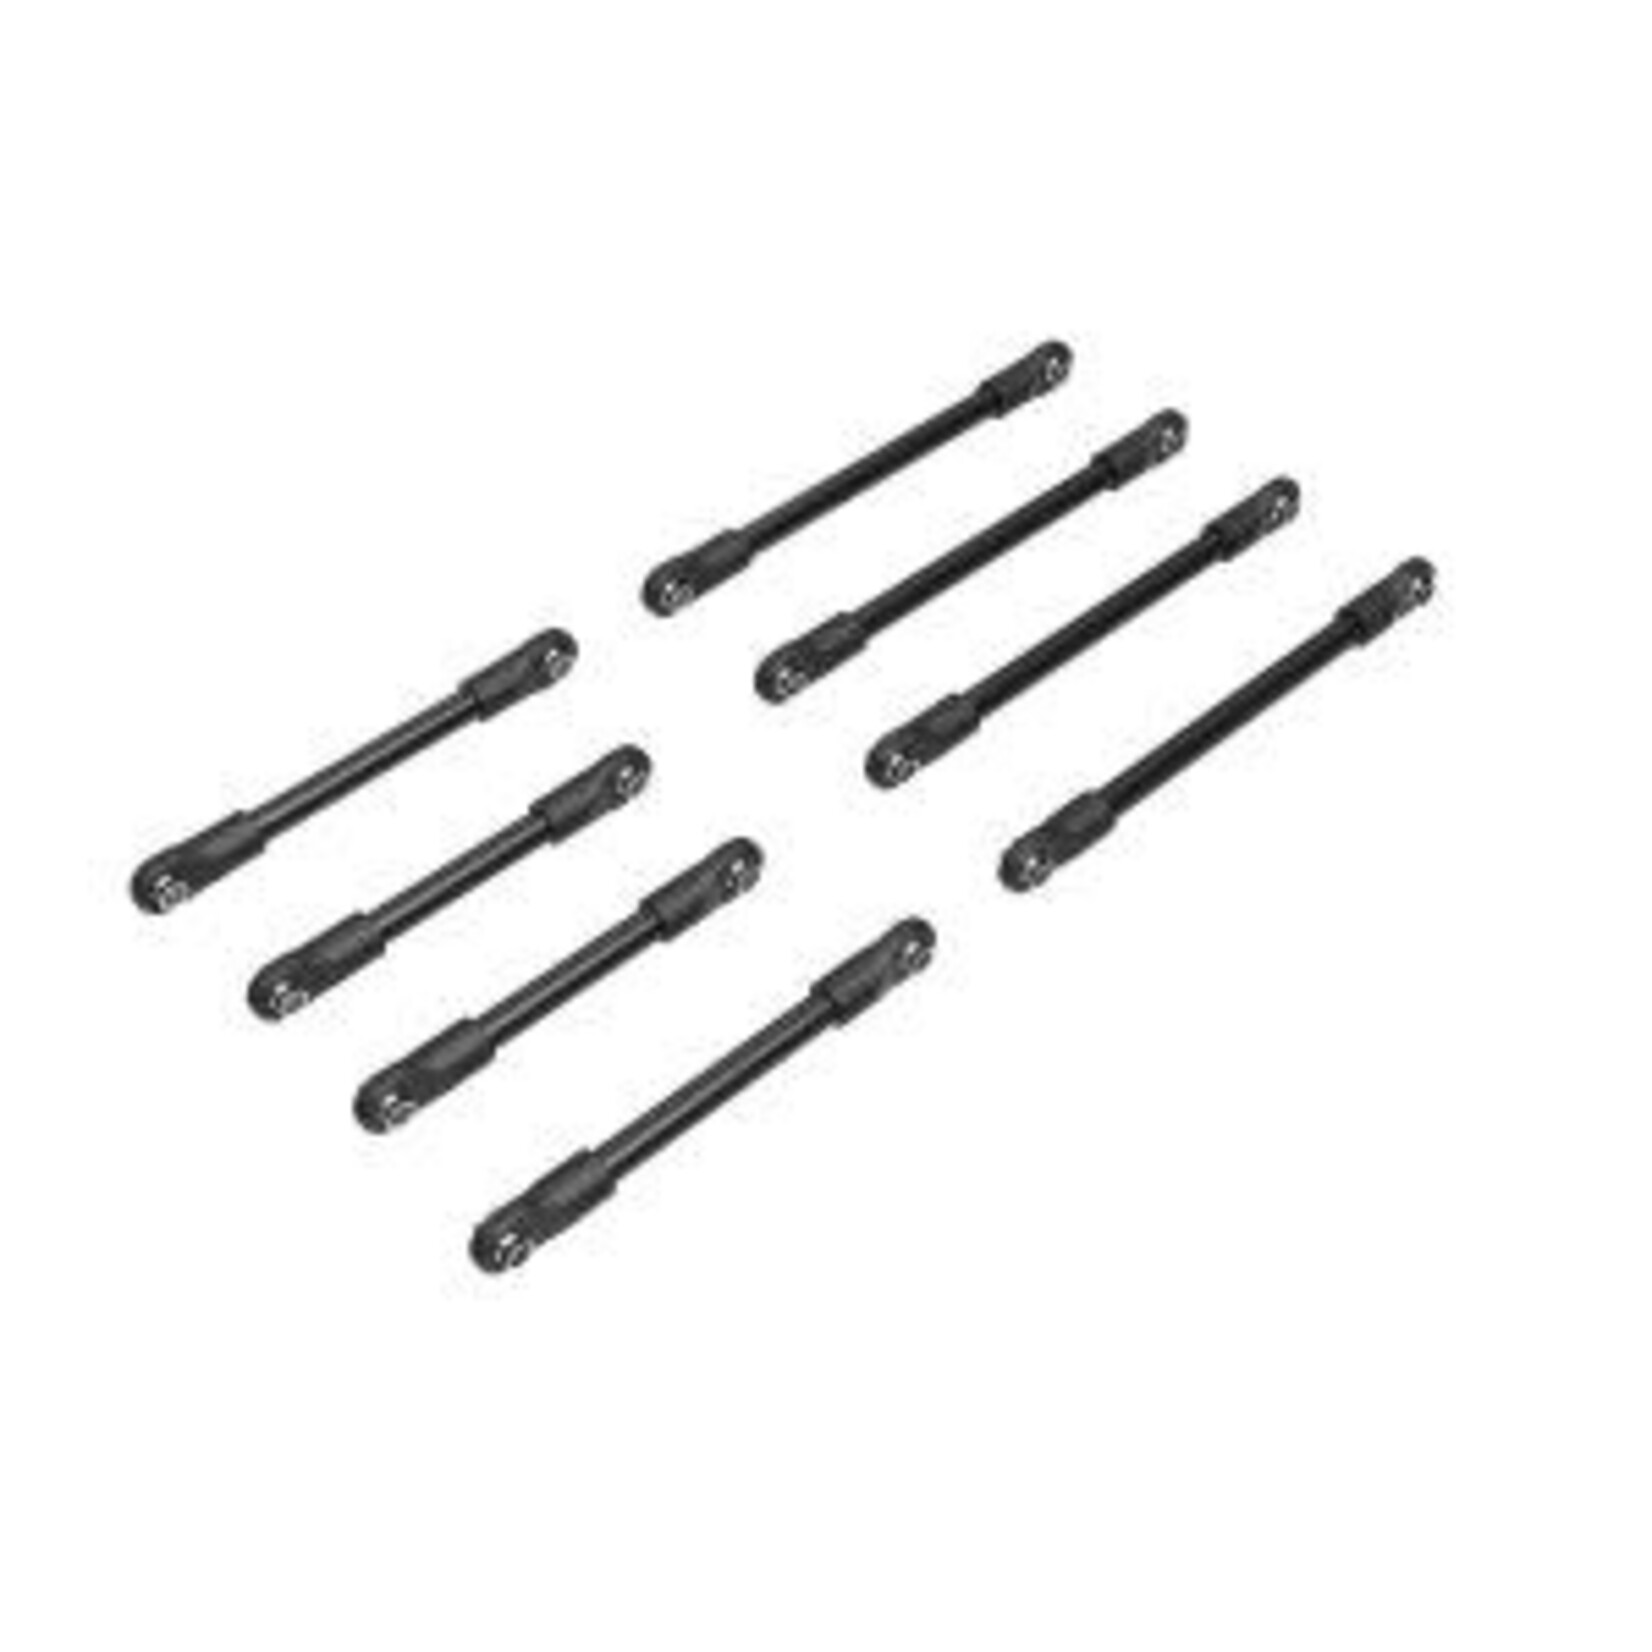 Traxxas 9749 Suspension link set, steel (includes 4x53mm front lower links (2), 4x46mm front upper links (2), 4x68mm rear lower or upper links (4))